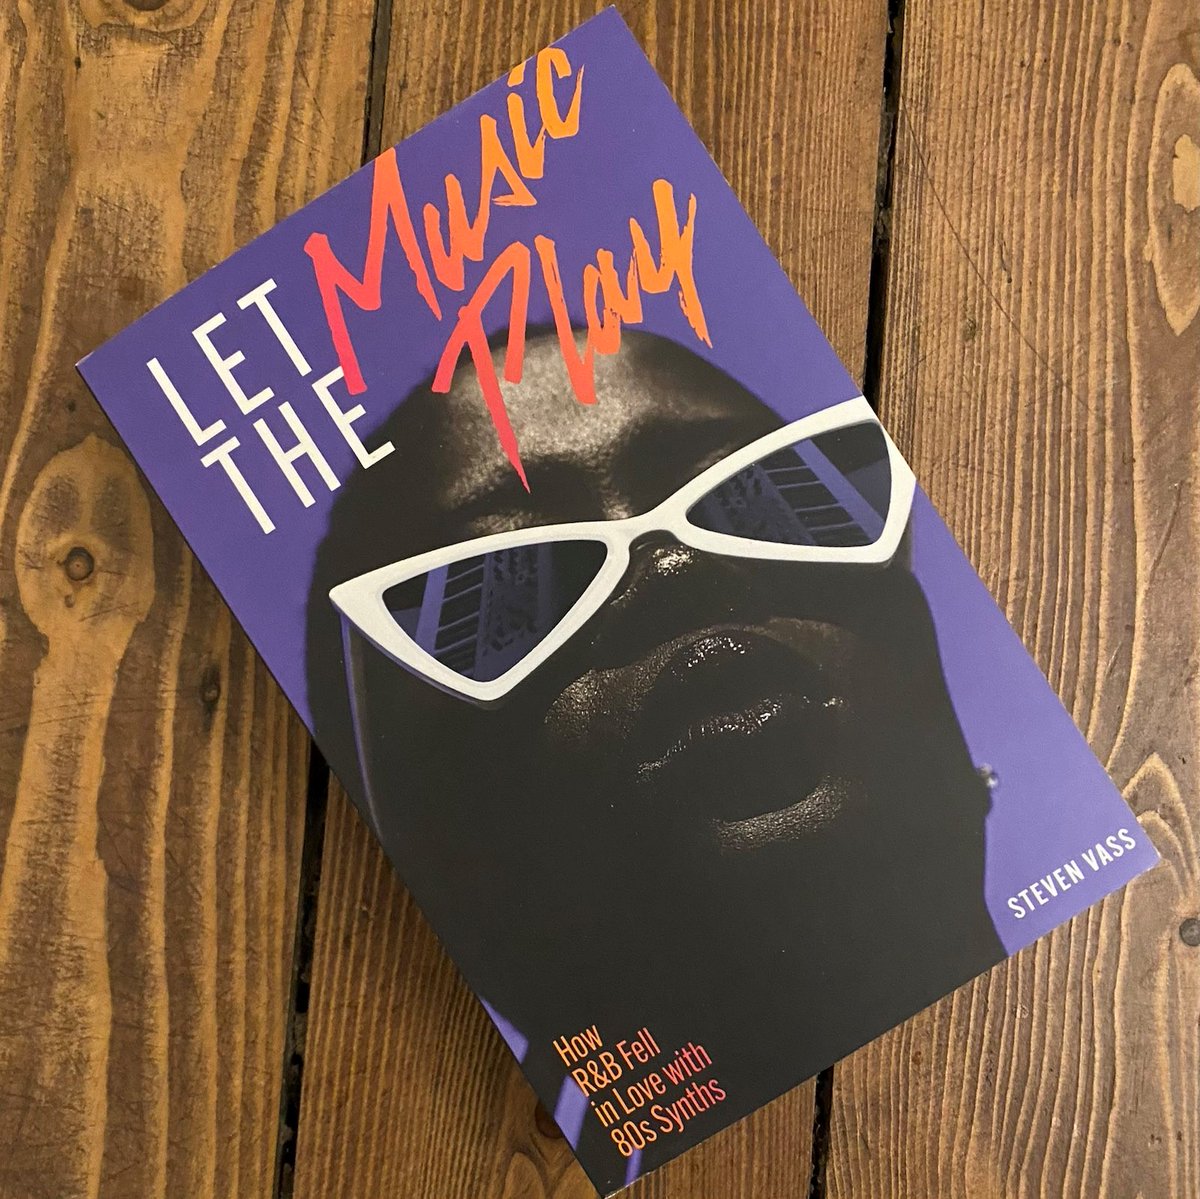 Big thanks to Steven Vass for the copy he sent me of his new book, ‘Let The Music Play – How R&B Fell In Love With ‘80s Synths’, it’s a huge undertaking of over 450 pages, focusing on how black music evolved via the technological advances of the ‘70s and ‘80s.